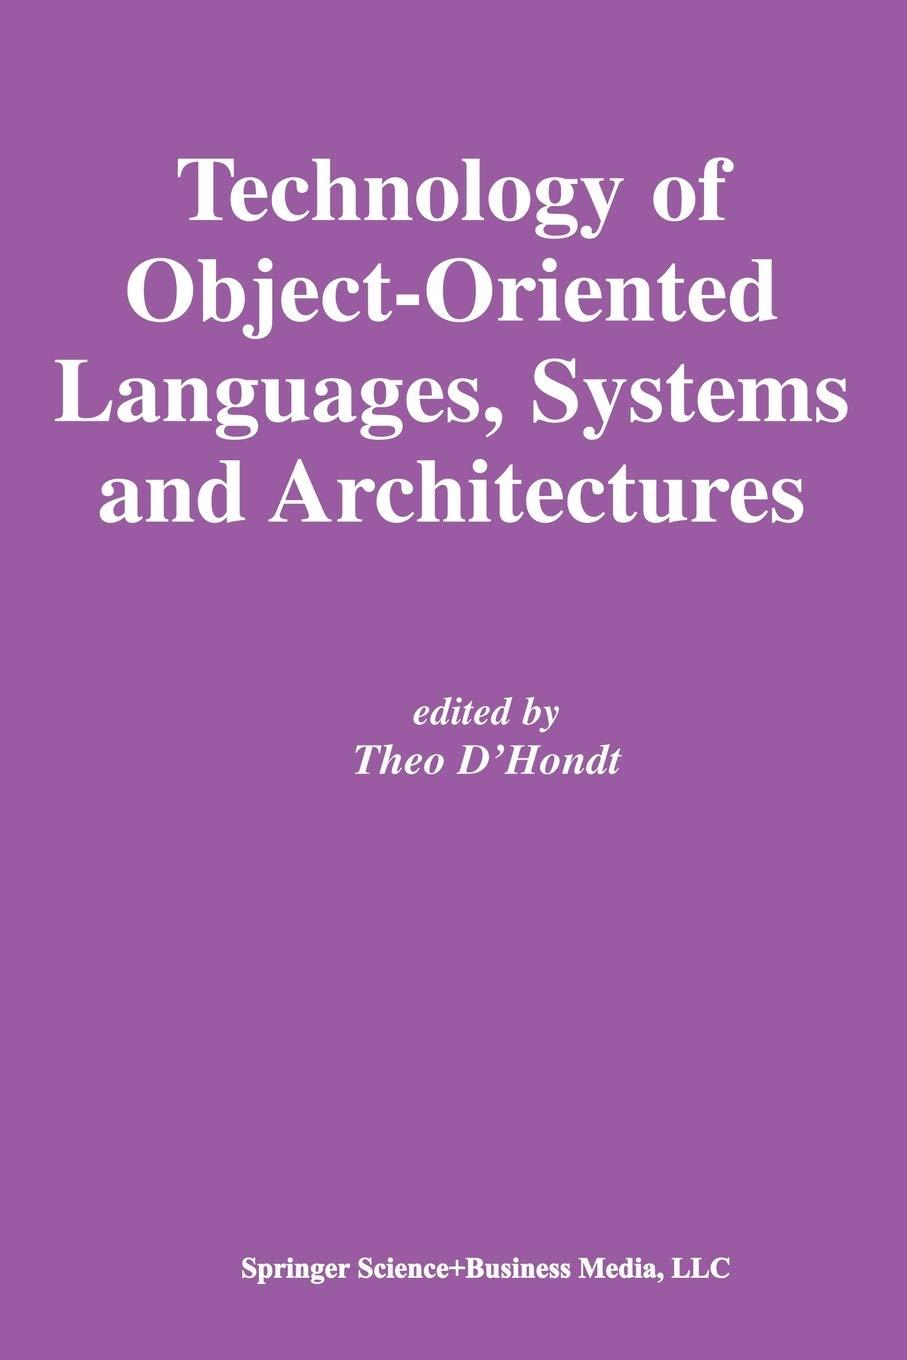 technology of object oriented languages systems and architectures 2003 edition theo d'hondt 1461350646,